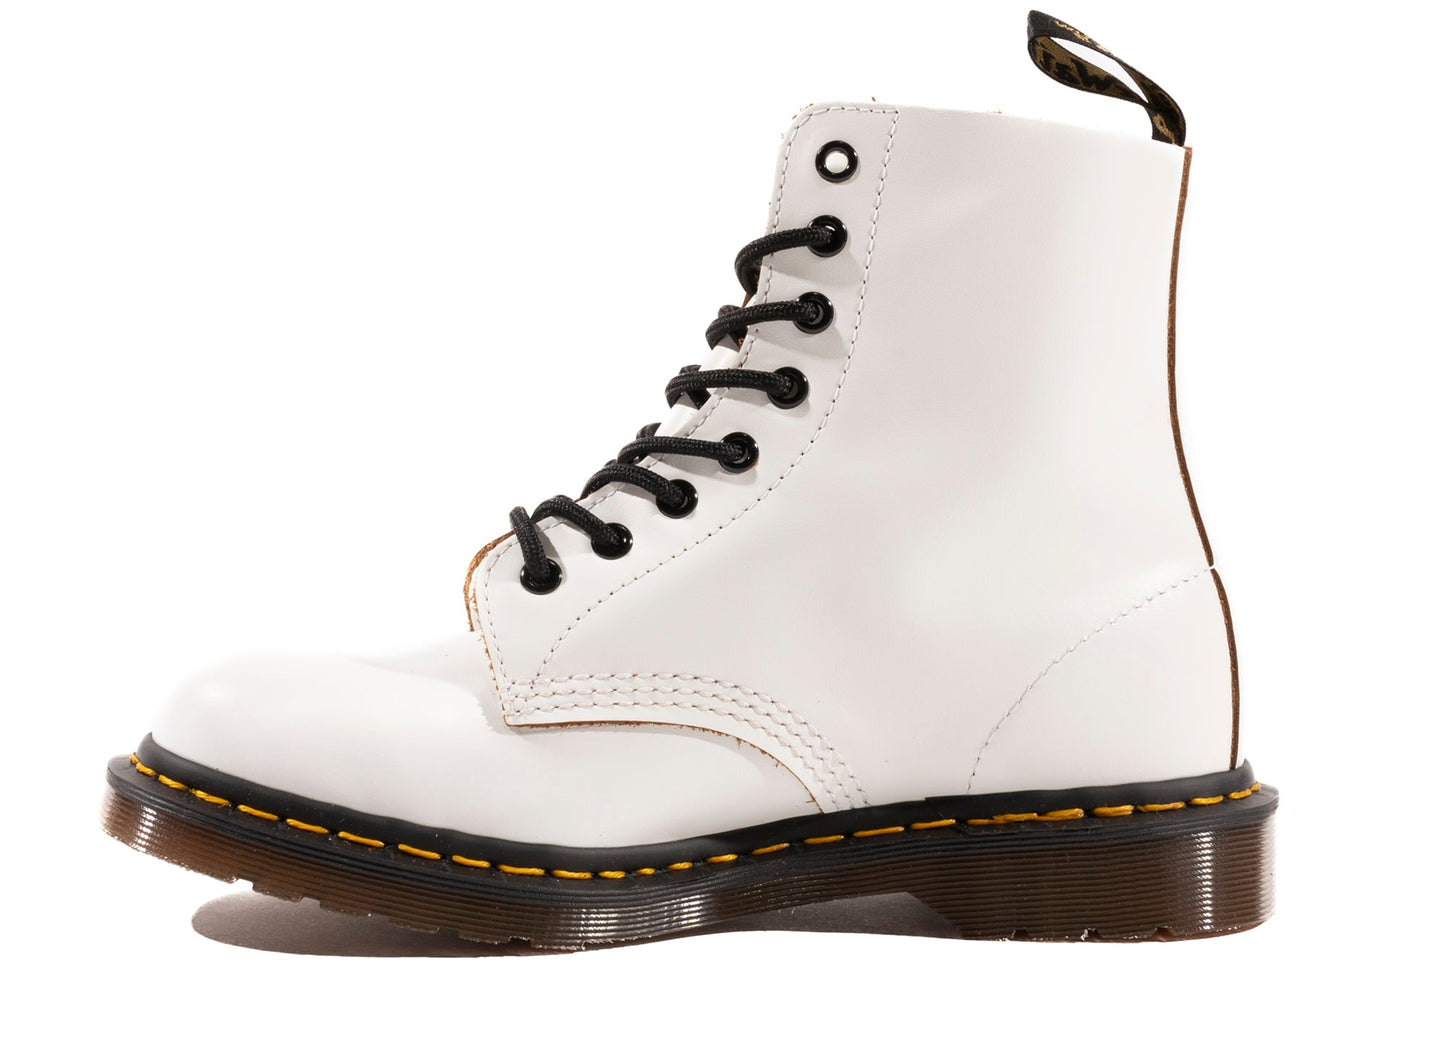 Dr. Martens Vintage 1460 Made in England Lace Up Boots